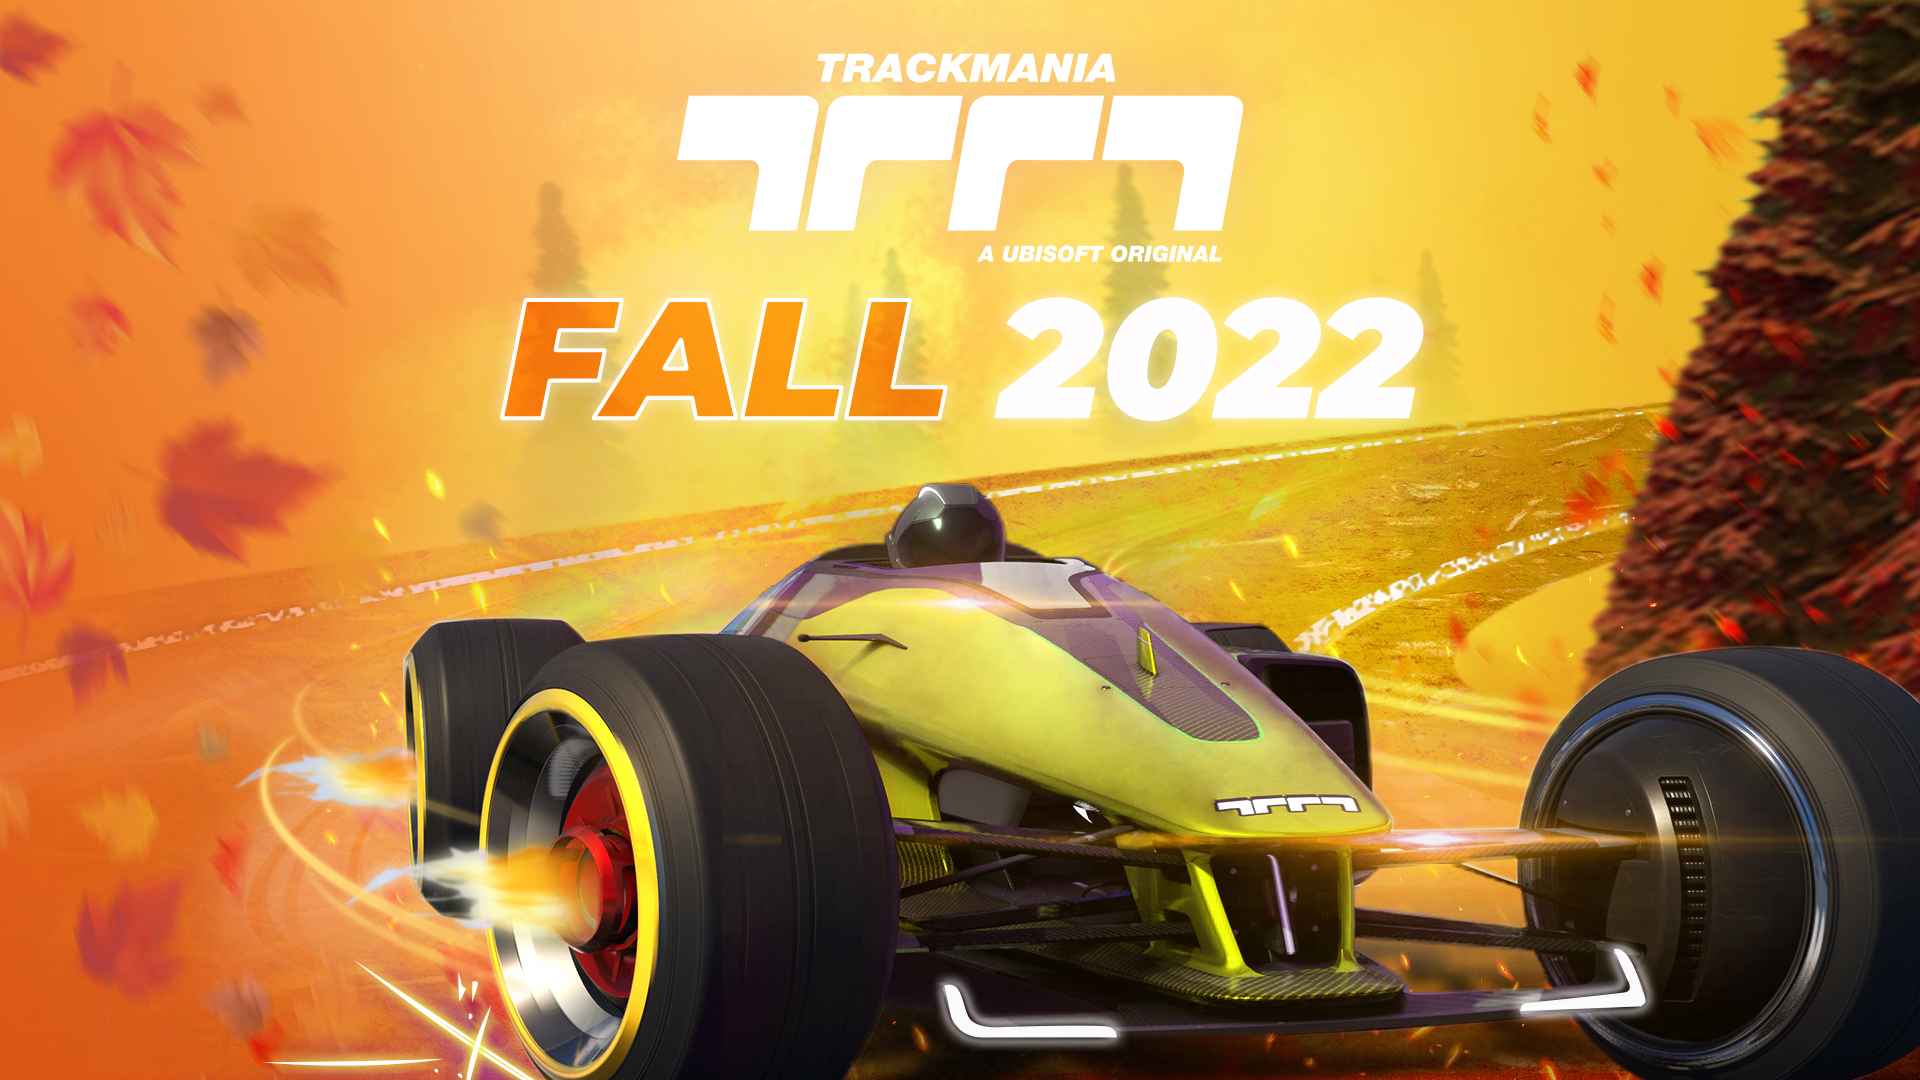 The Fall 2022 campaign is out now  